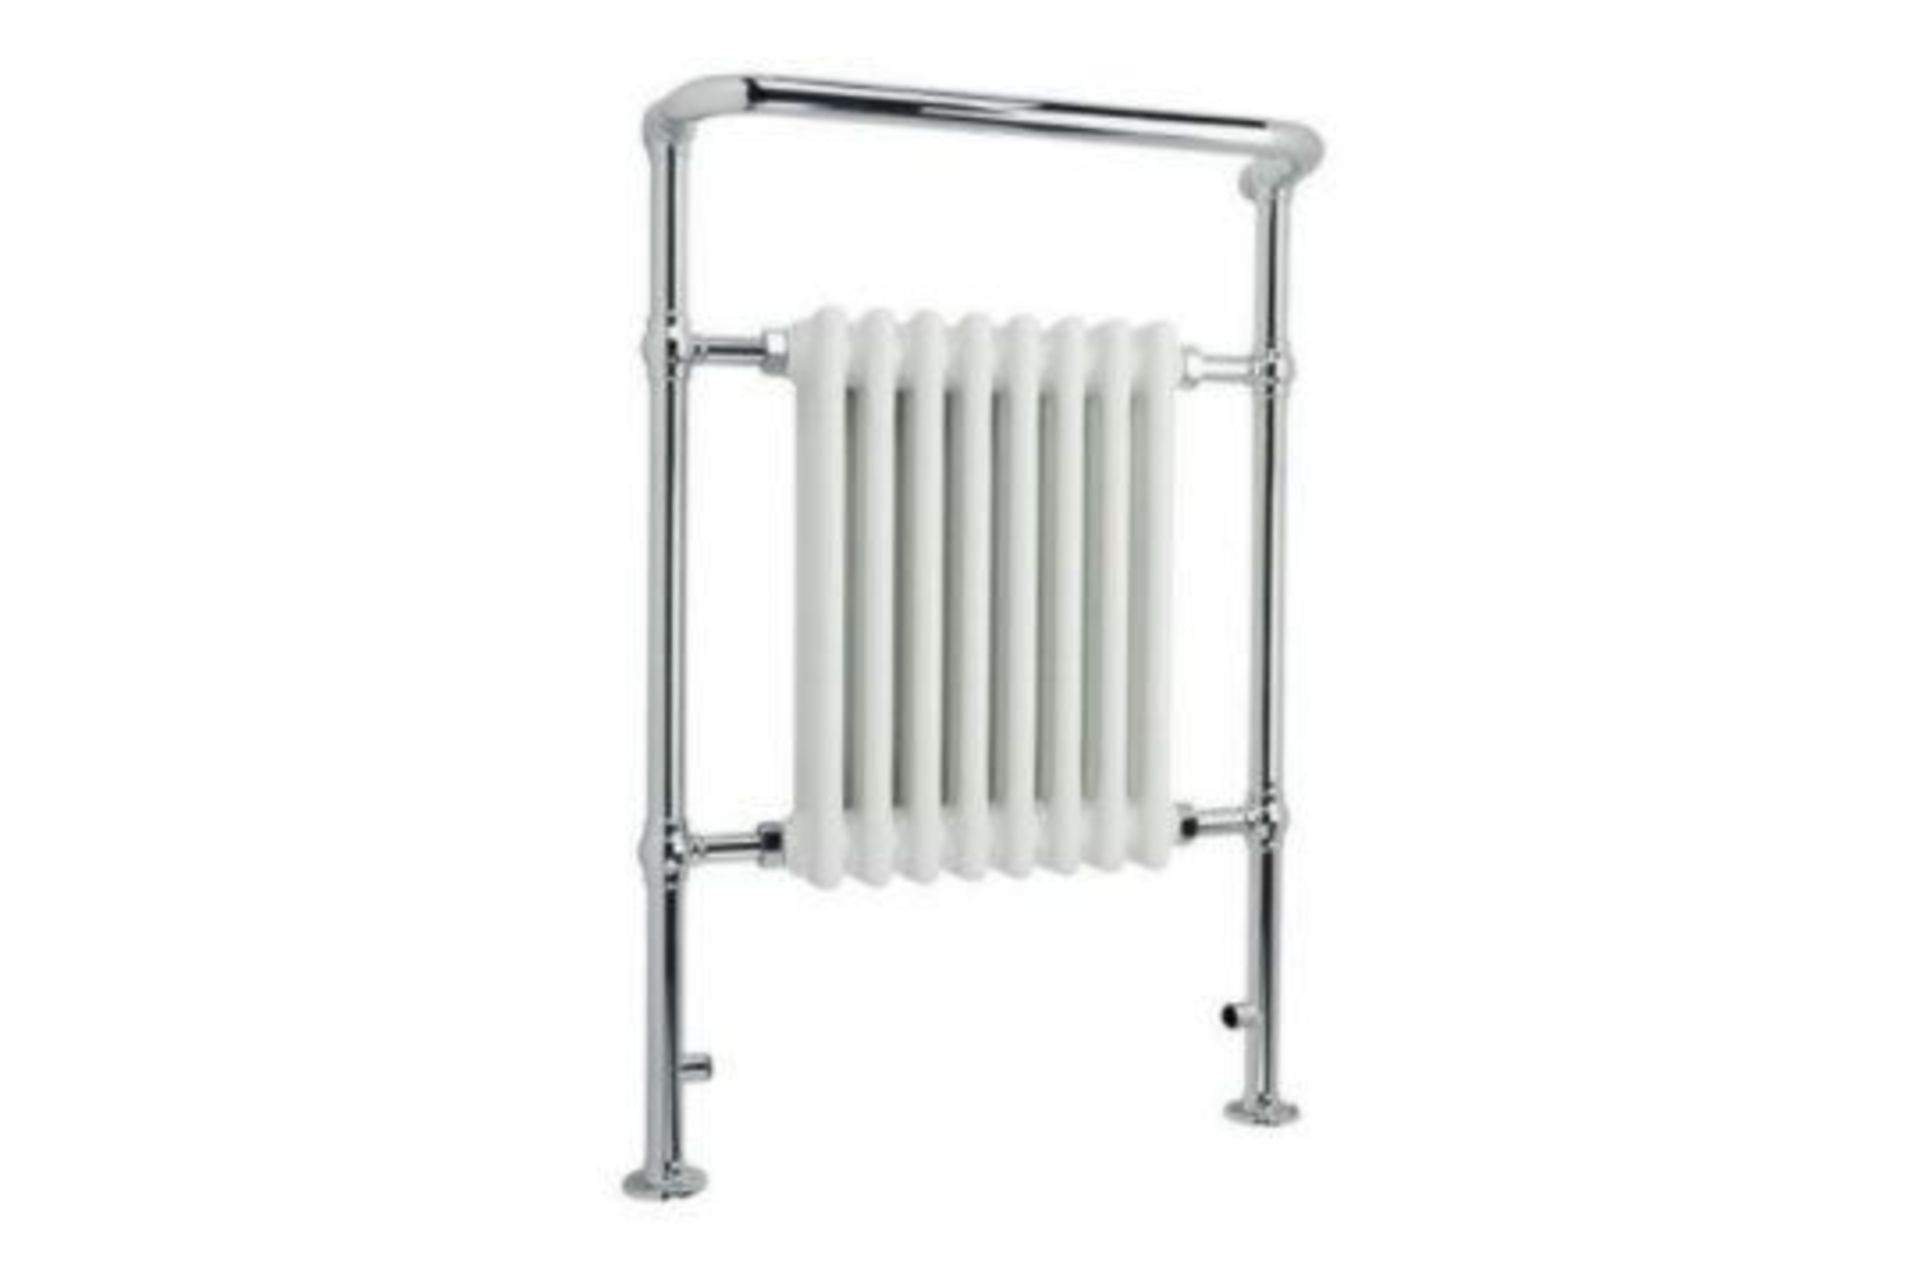 NEW (Q152) NEW 952x659mm Large Traditional White Premium Towel Rail Radiator.RRP £499.99.We lo... - Image 2 of 2